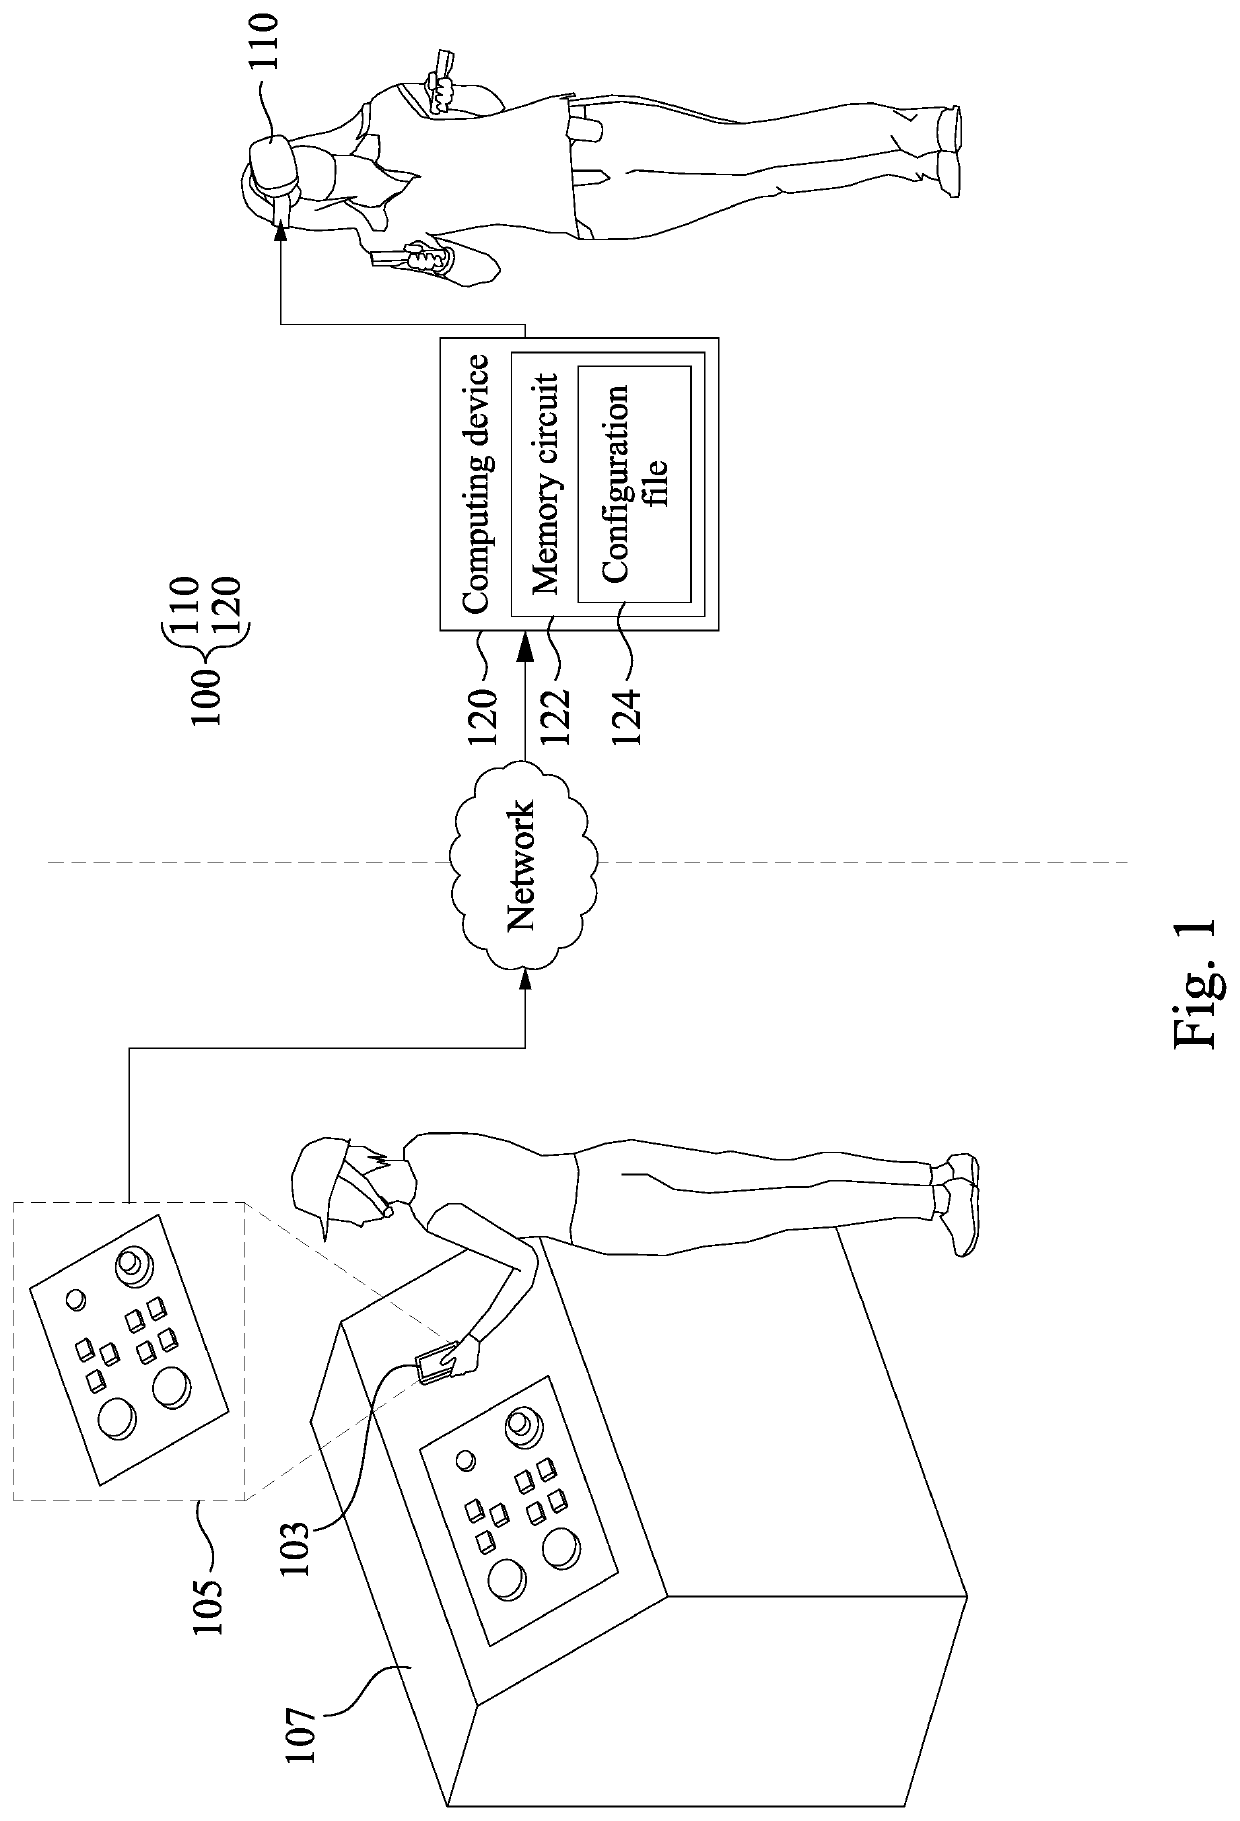 Method of generating user-interactive object, multimedia system, and non-transitory computer-readable medium